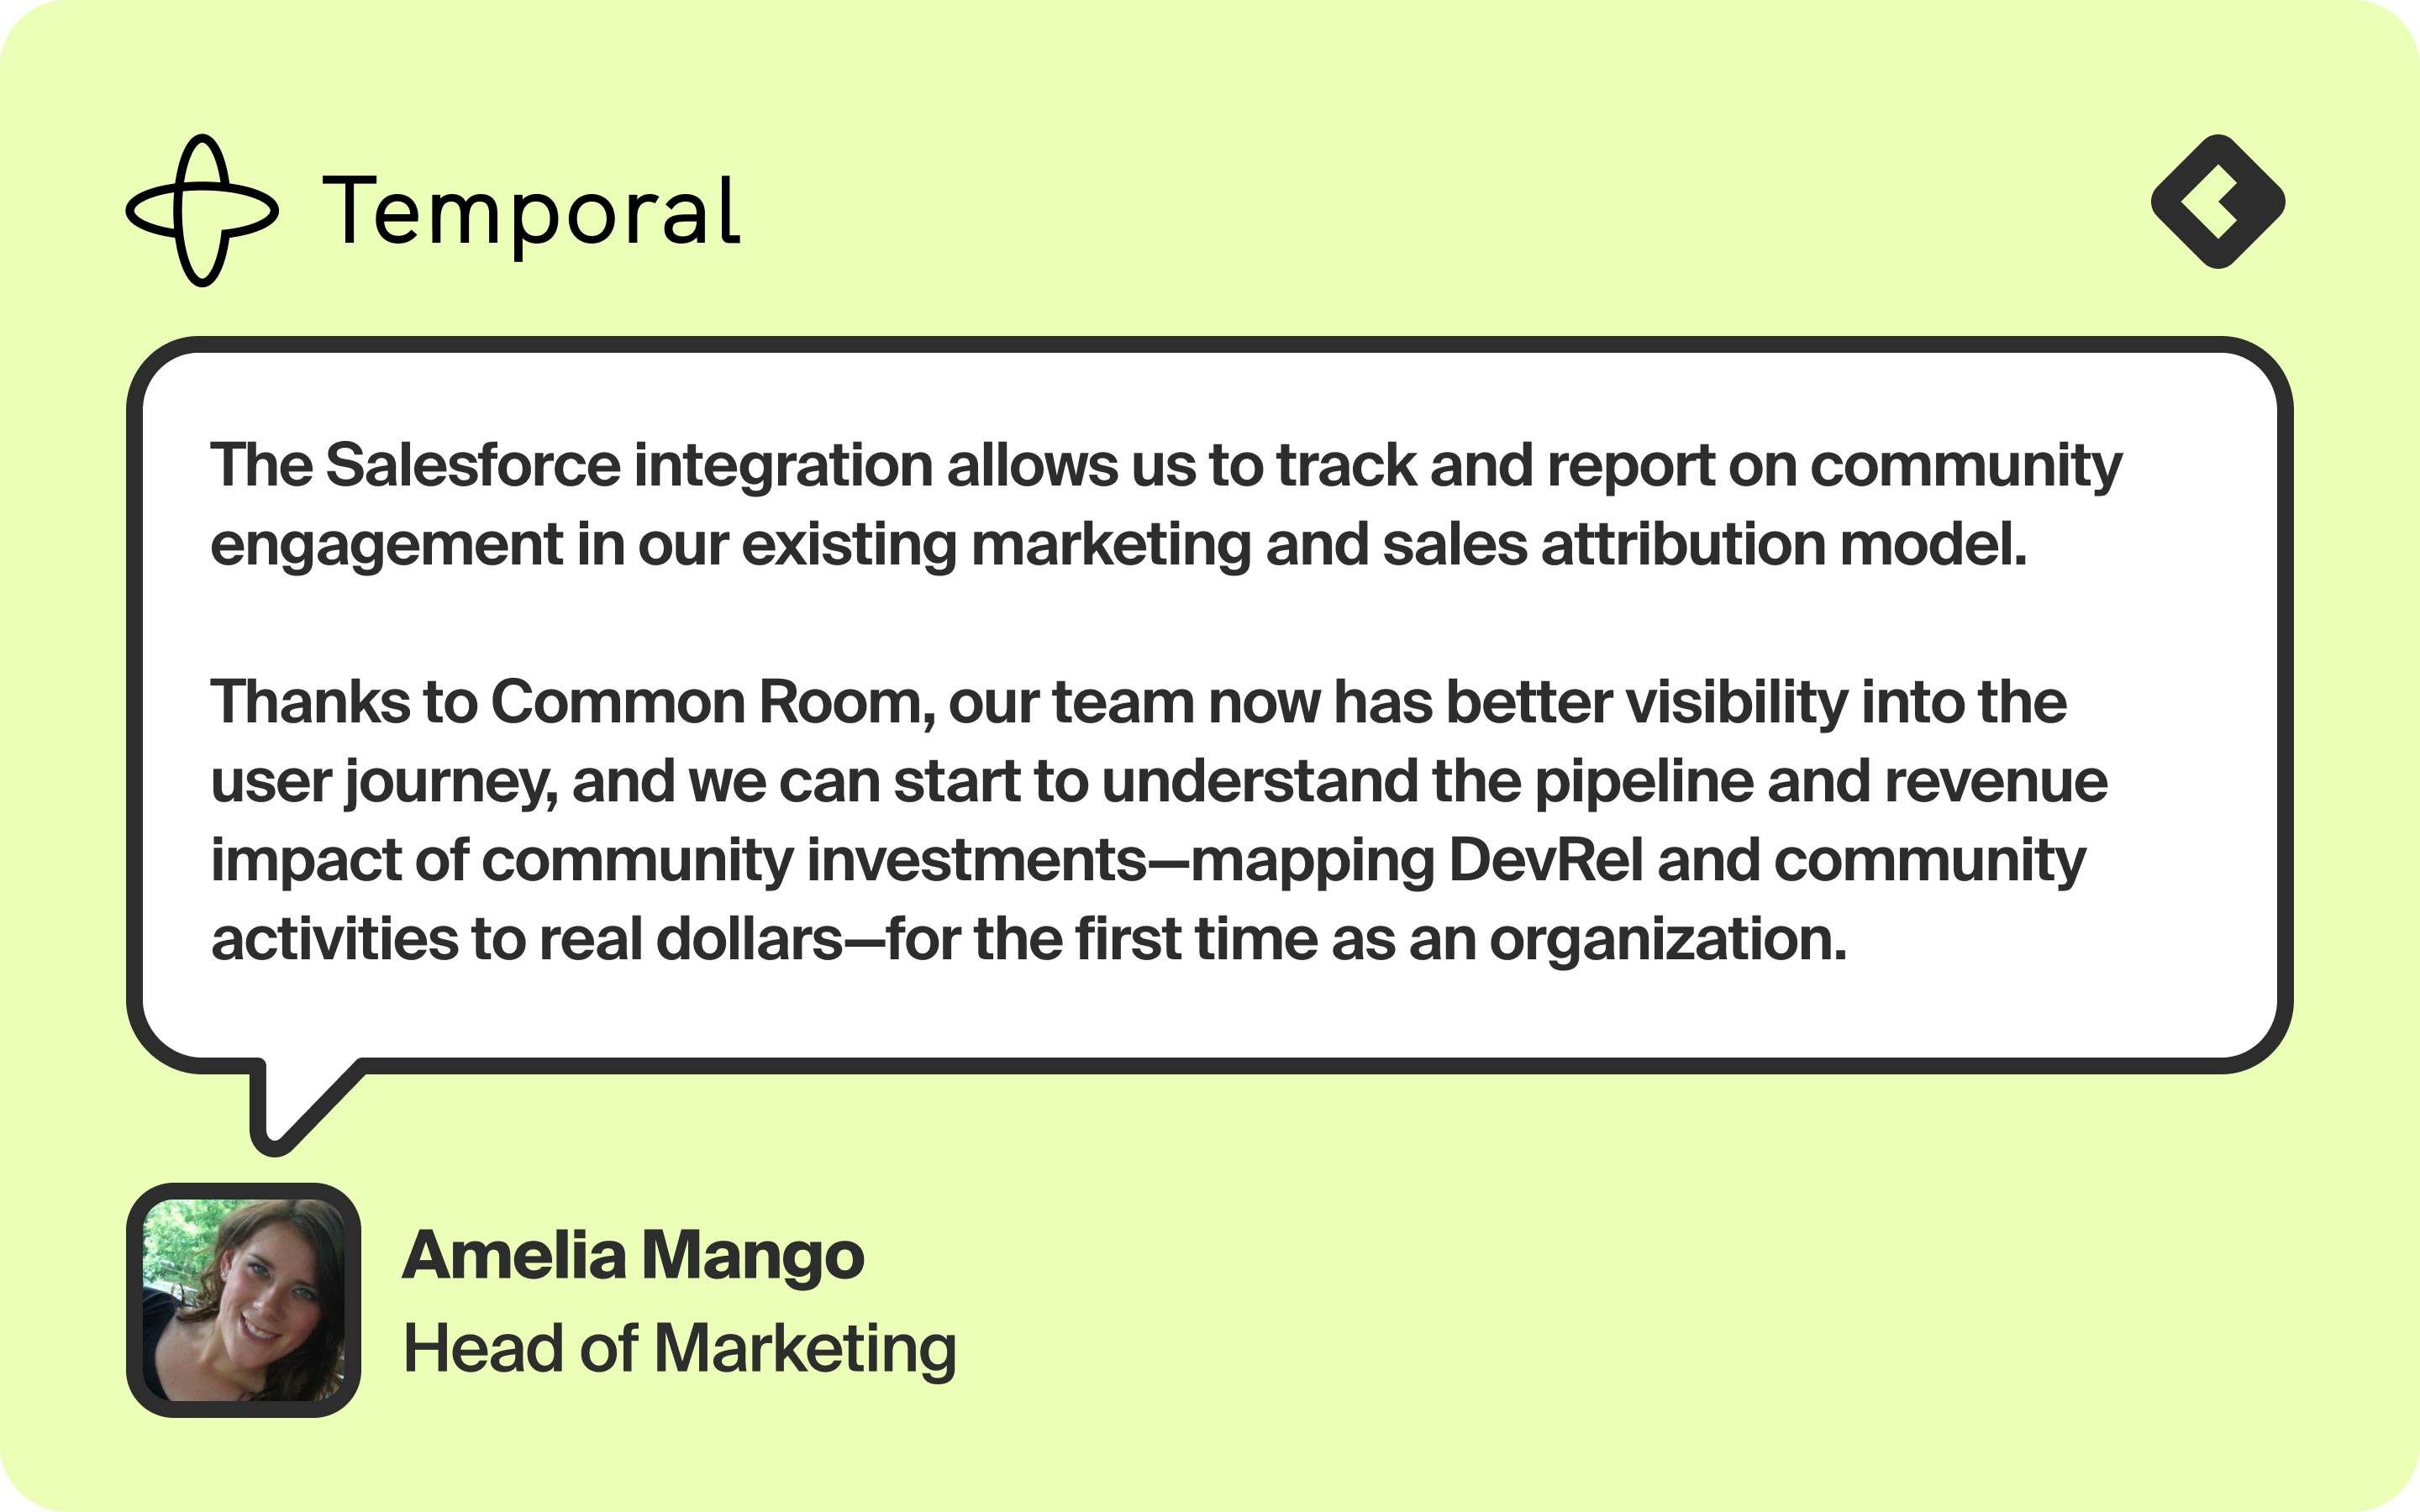 Image of a quote from Amelia Mango, Head of Marketing at Temporal: "The Salesforce integration allows us to track and report on community engagement in our existing marketing and sales attribution model. Thanks to Common Room, our team now has better visibility into the user journey, and we can start to understand the pipeline and revenue impact of community investments—mapping DevRel and community activities to real dollars—for the first time as an organization."